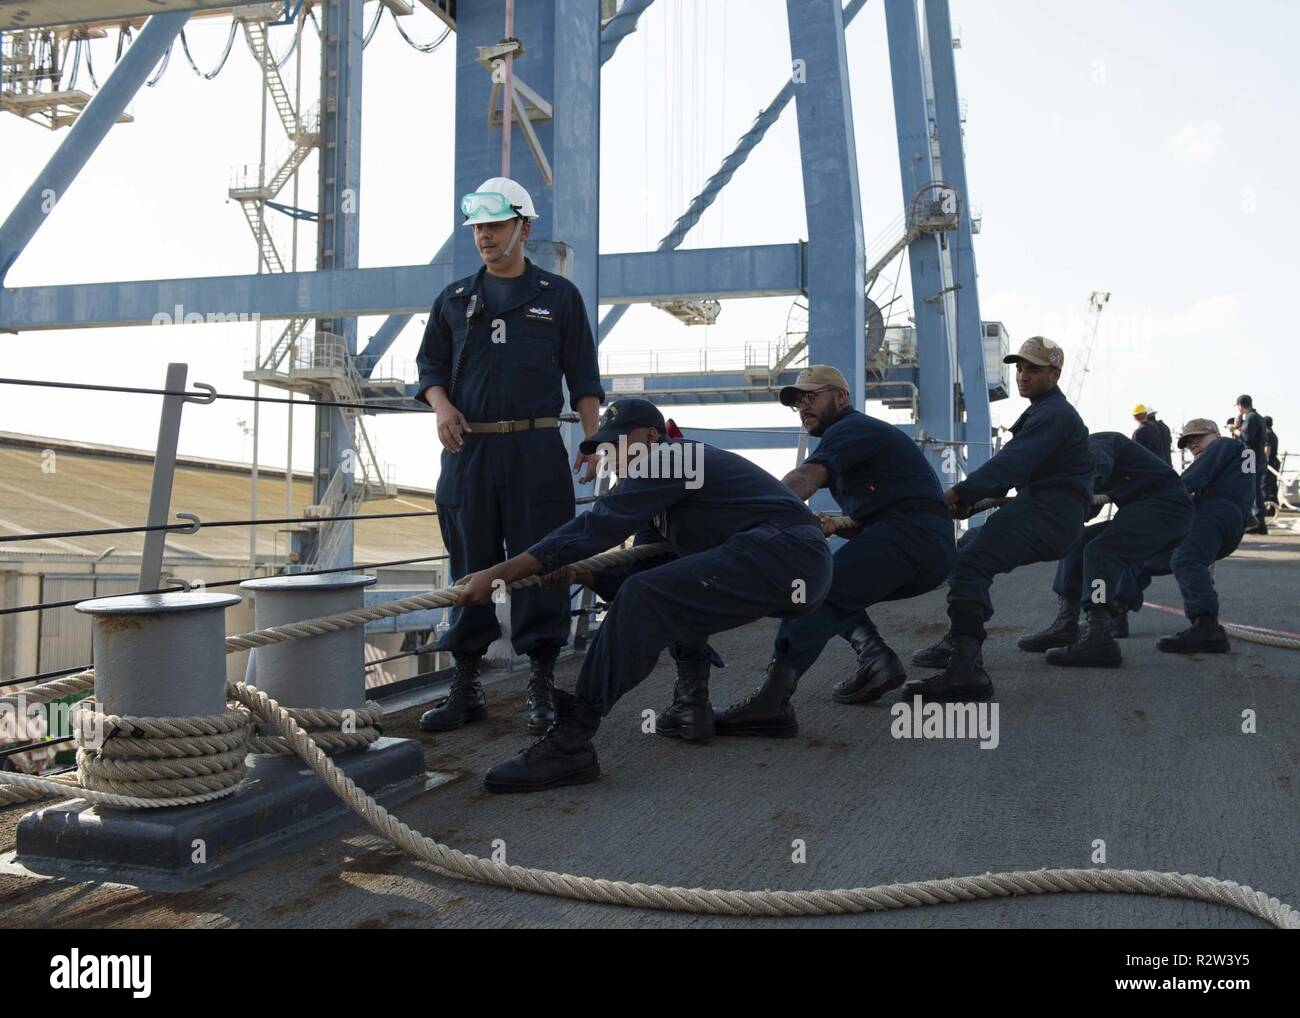 LARNACA, Cyprus (Nov. 9, 2018) Sailors place a mooring line on a bit aboard the Arleigh Burke-class guided-missile destroyer USS Arleigh Burke (DDG 51) as the ship arrives at Larnaca, Cyprus for a scheduled port visit Nov. 9, 2018. Arleigh Burke, homeported at Naval Station Norfolk, is conducting naval operations in the U.S. 6th Fleet area of operations in support of U.S. national security interests in Europe and Africa. Stock Photo